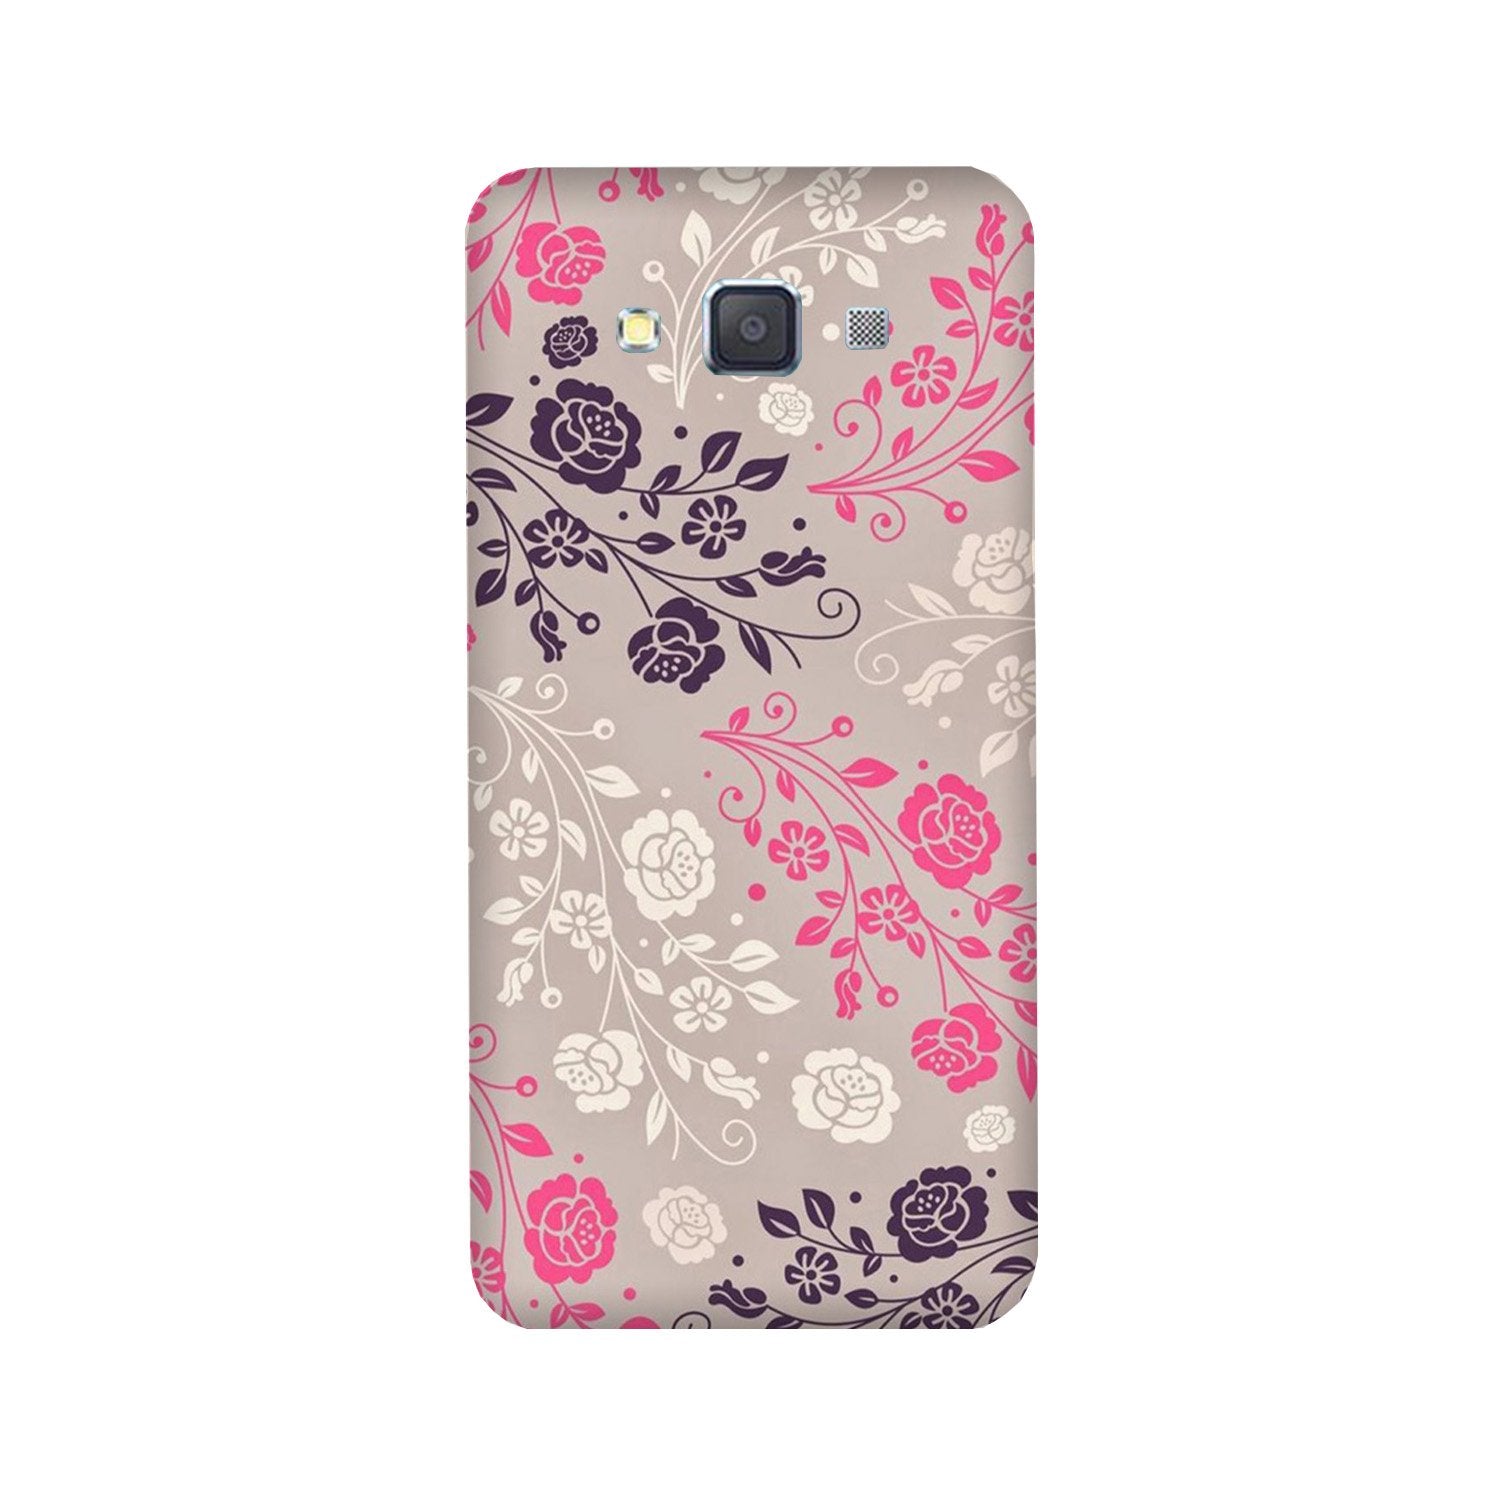 Pattern2 Case for Galaxy Grand Prime